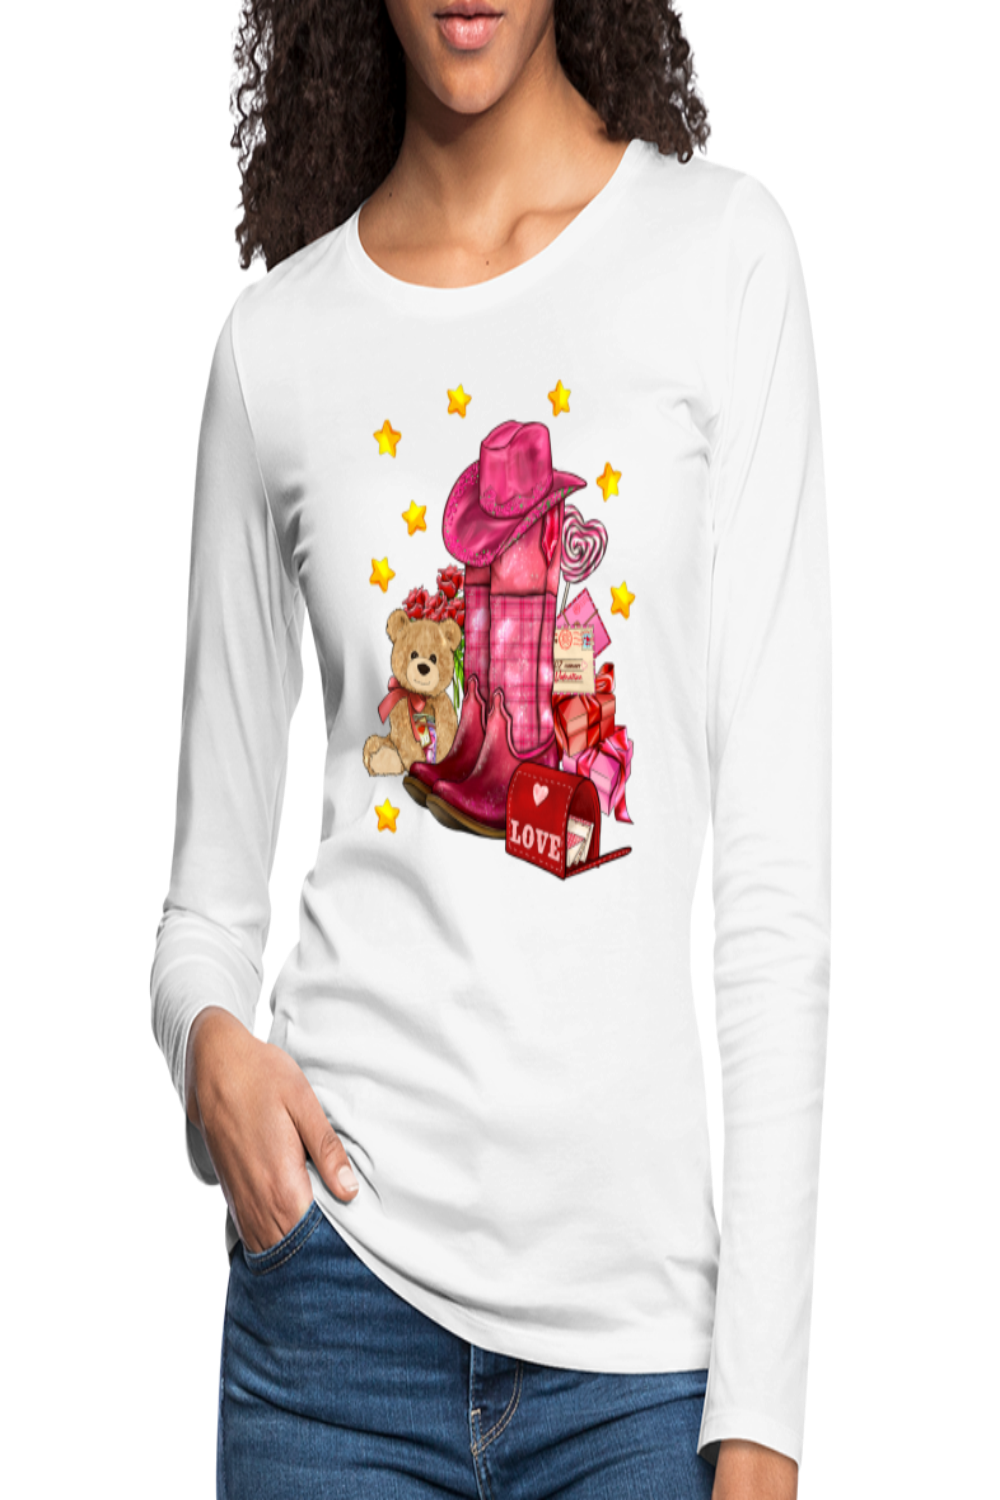 Women's Valentine's Day Cow Girl Hat and Boots Long Sleeve T-Shirt - white  - NicholesGifts.online